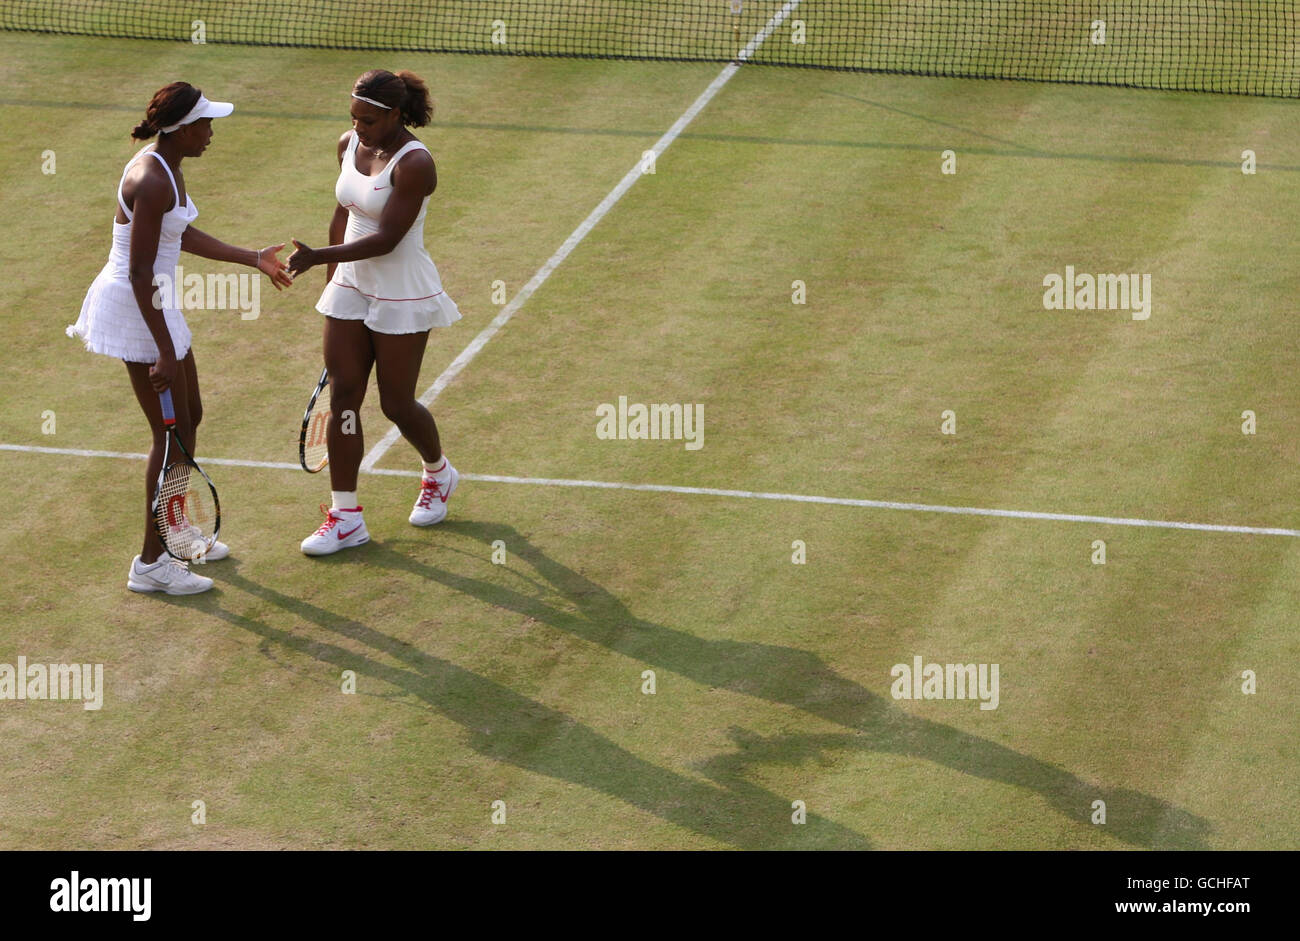 USA's Venus (left) and Serena Williams in their doubles match against Switzerland's Timea Bacsinszky and Italy's Tathiana Garbin during Day Five of the 2010 Wimbledon Championships at the All England Lawn Tennis Club, Wimbledon. Stock Photo